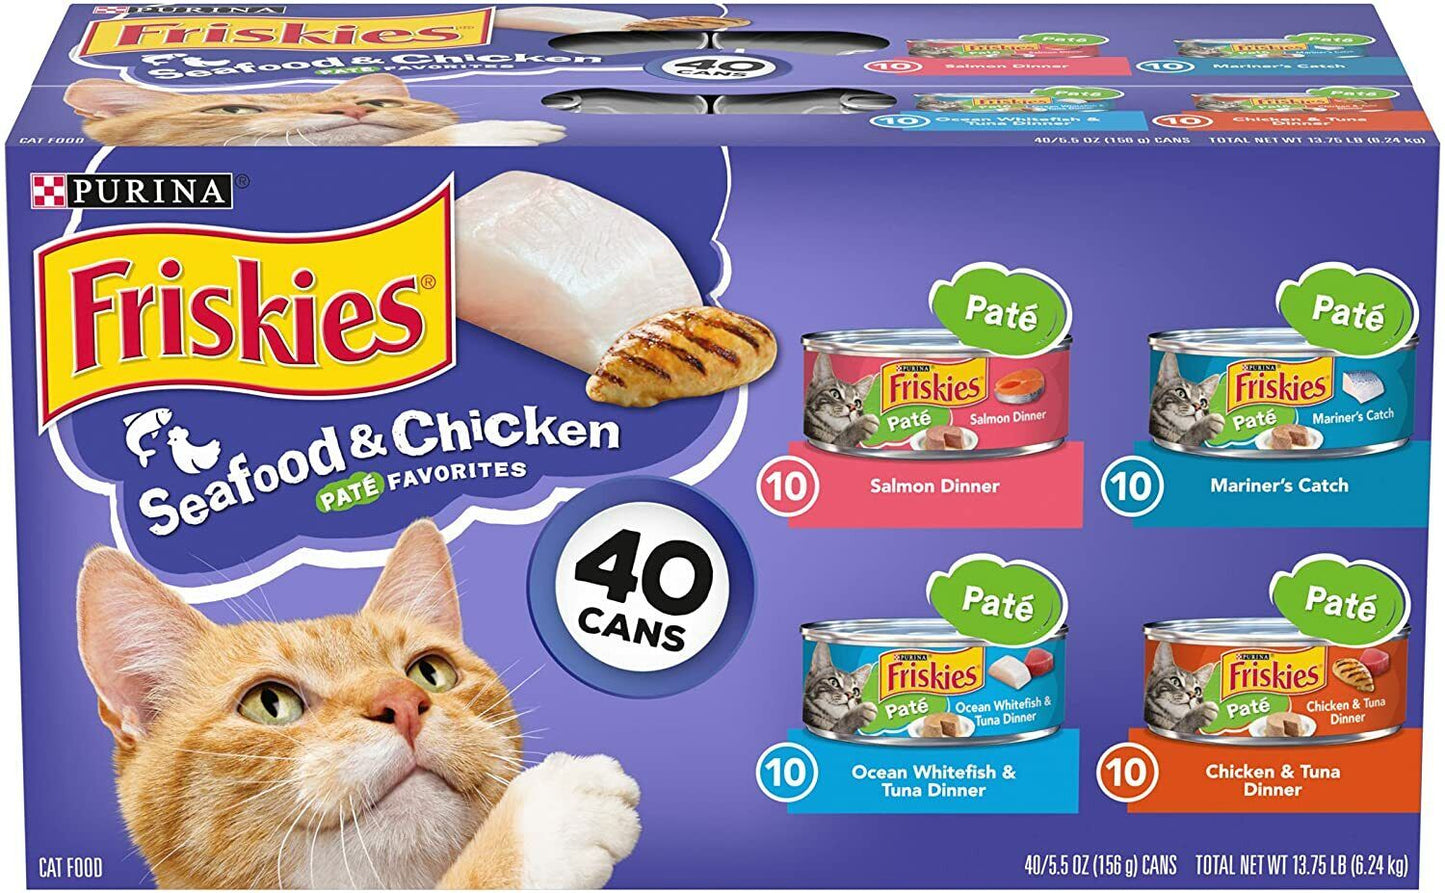 Friskies Seafood & Chicken Pate Favorites Variety Wet Cat Food 5.5 oz, 40 Cans